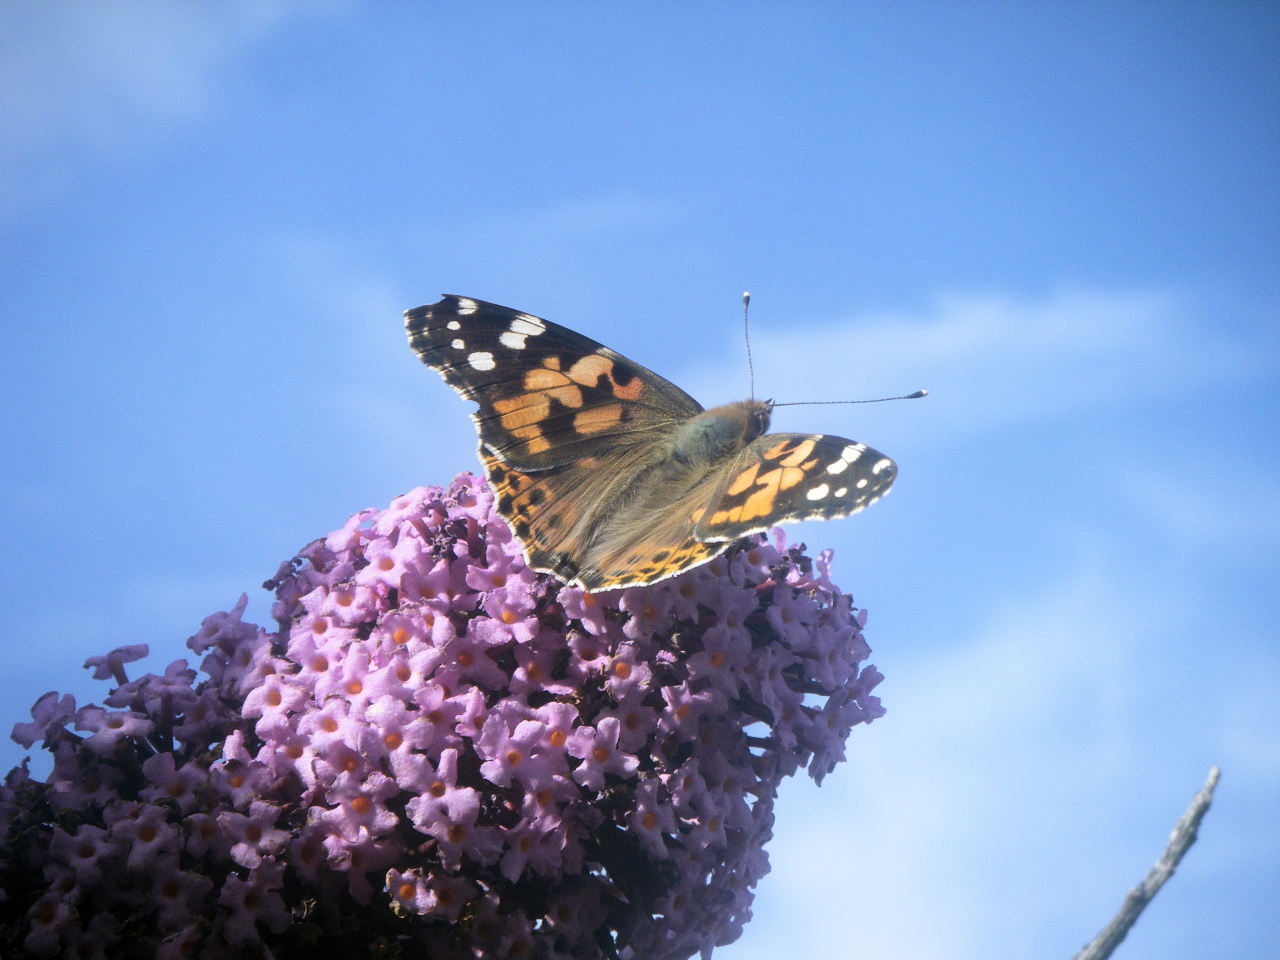 Summer time visitors
This image shows a migrating Painted lady butterfly, Vanessa cardui, feeding on nectar to sustain its flight from the UK back to North Africa.
Many insects, like this butterfly, make a long journey into the UK each summer to...